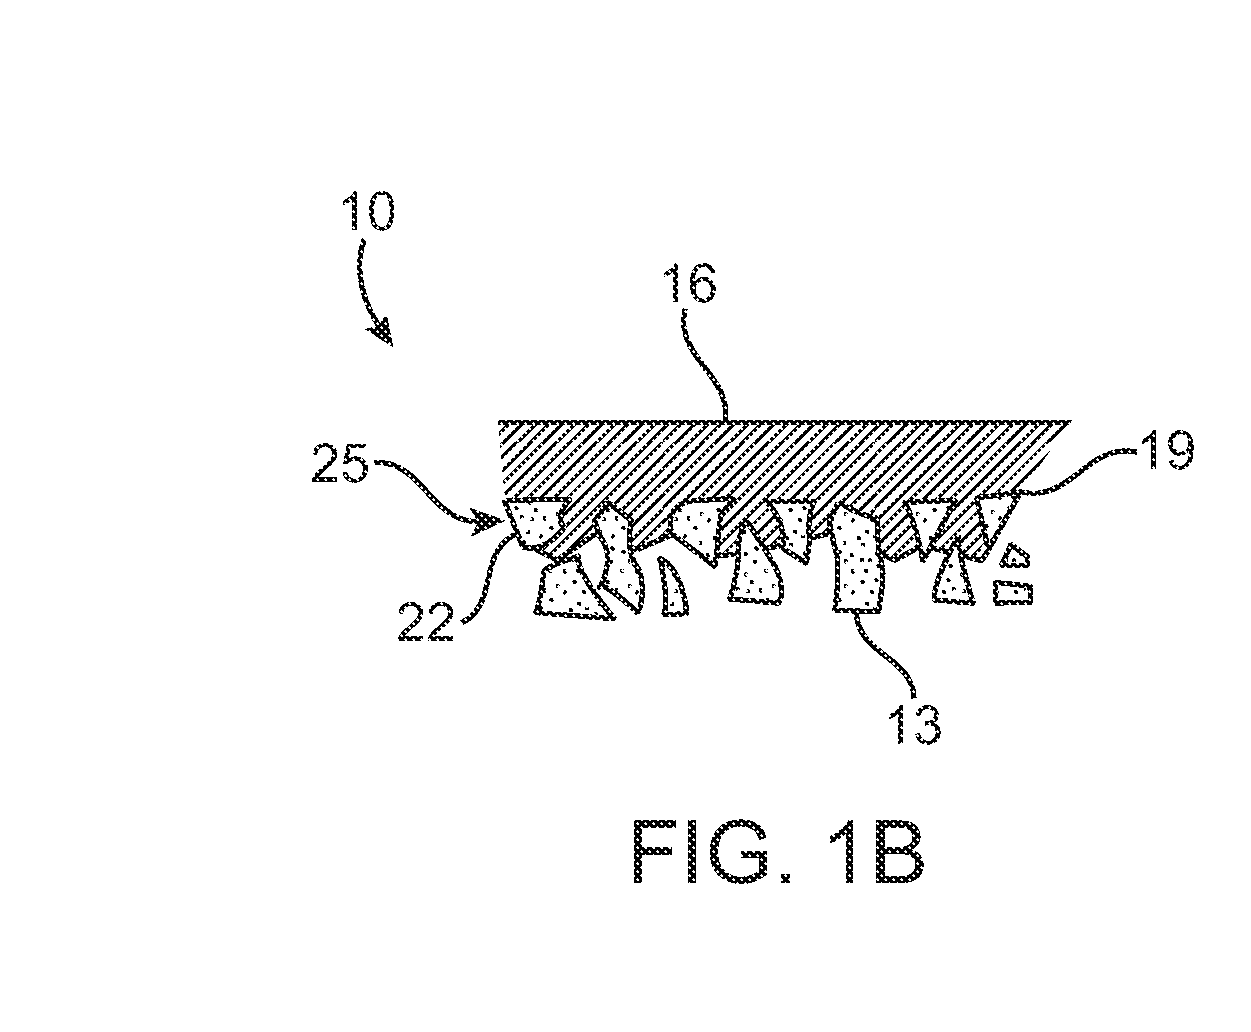 Material for creating multi-layered films and methods for making the same